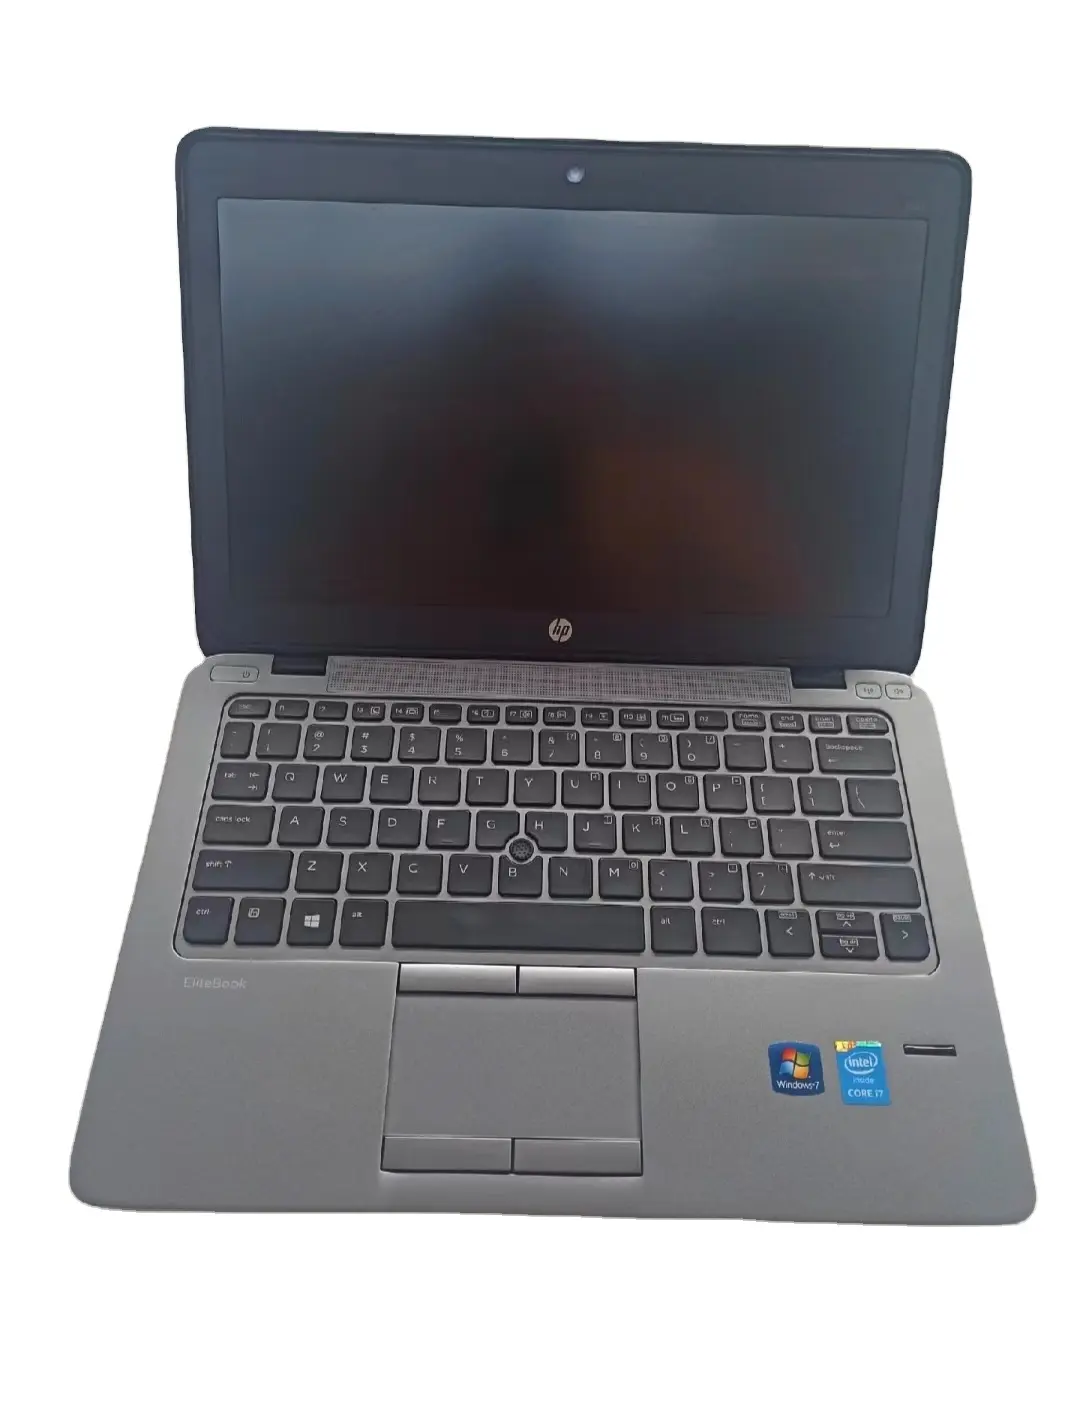 Brand Model 820G2 5 gen /4G/500G SSD/ 12.1-inch screen letop Used laptops Wholesale Used refurbished used laptops for sale